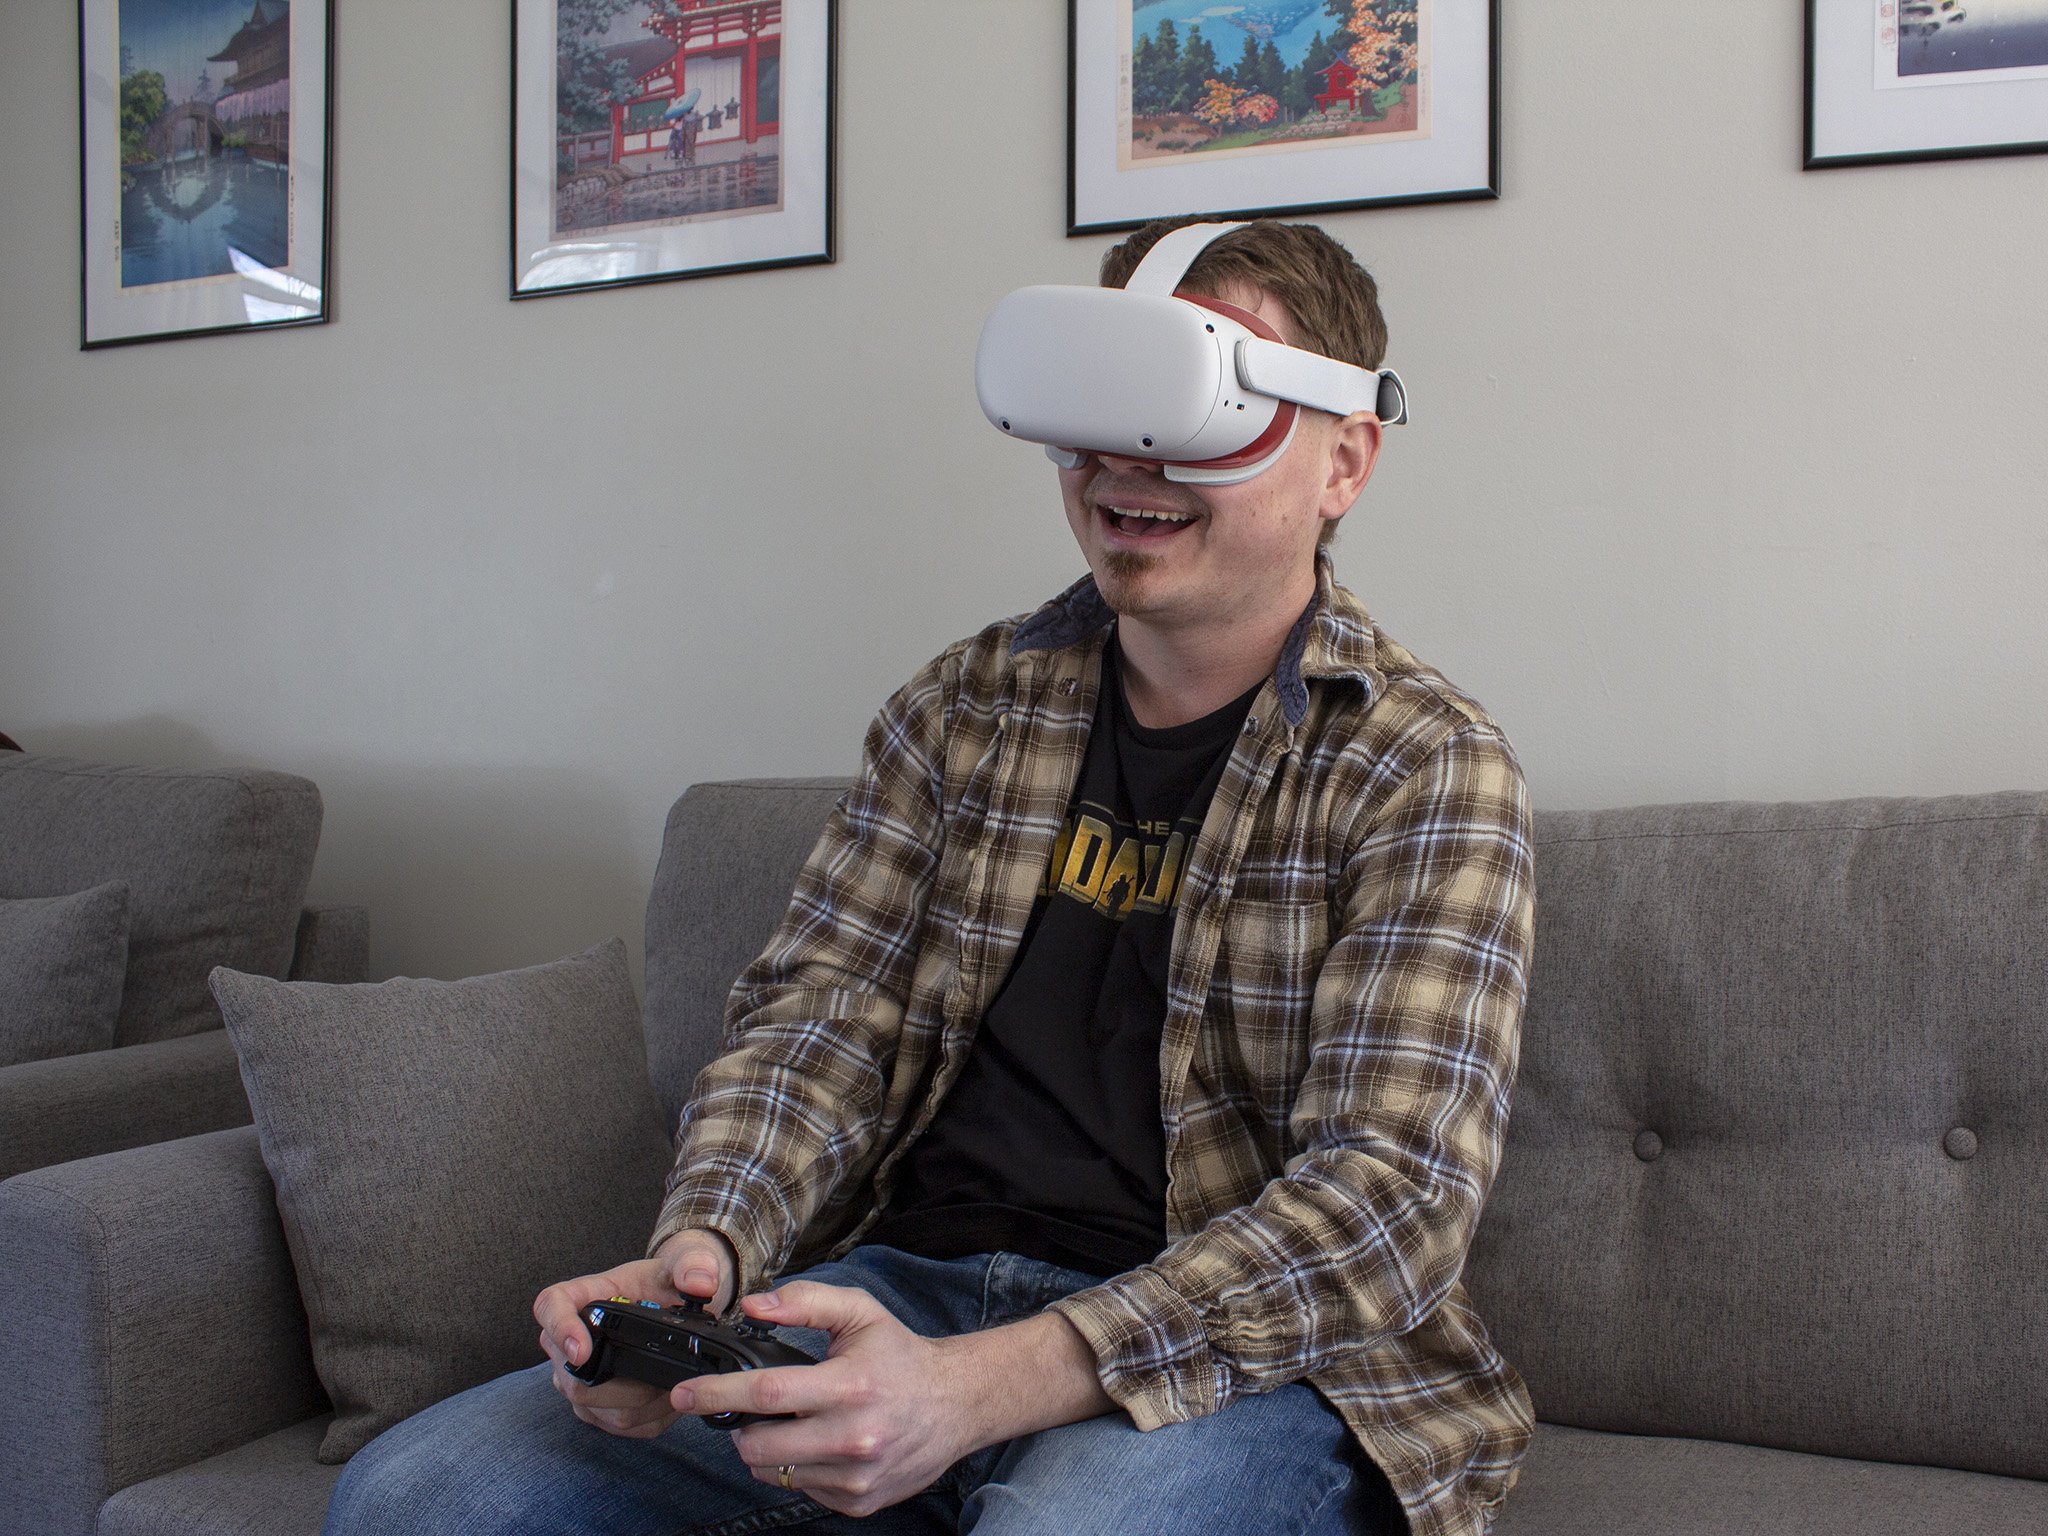 How to stream games to your Oculus | Android Central